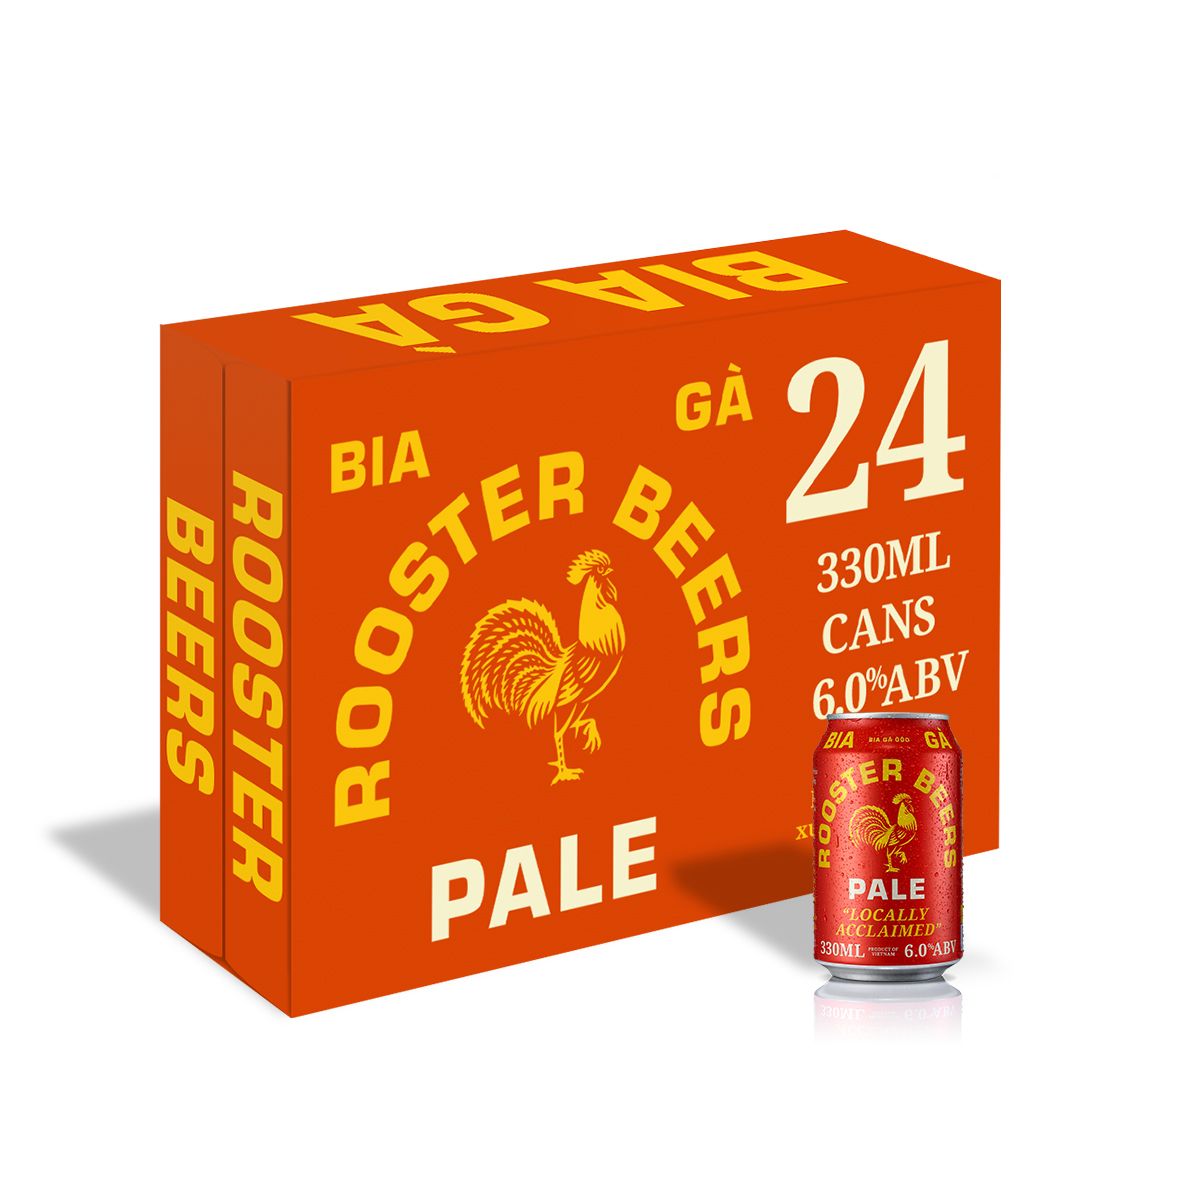  [TẶNG 2 LY] Rooster Beers Pale - Thùng 24 Lon (330ml) 